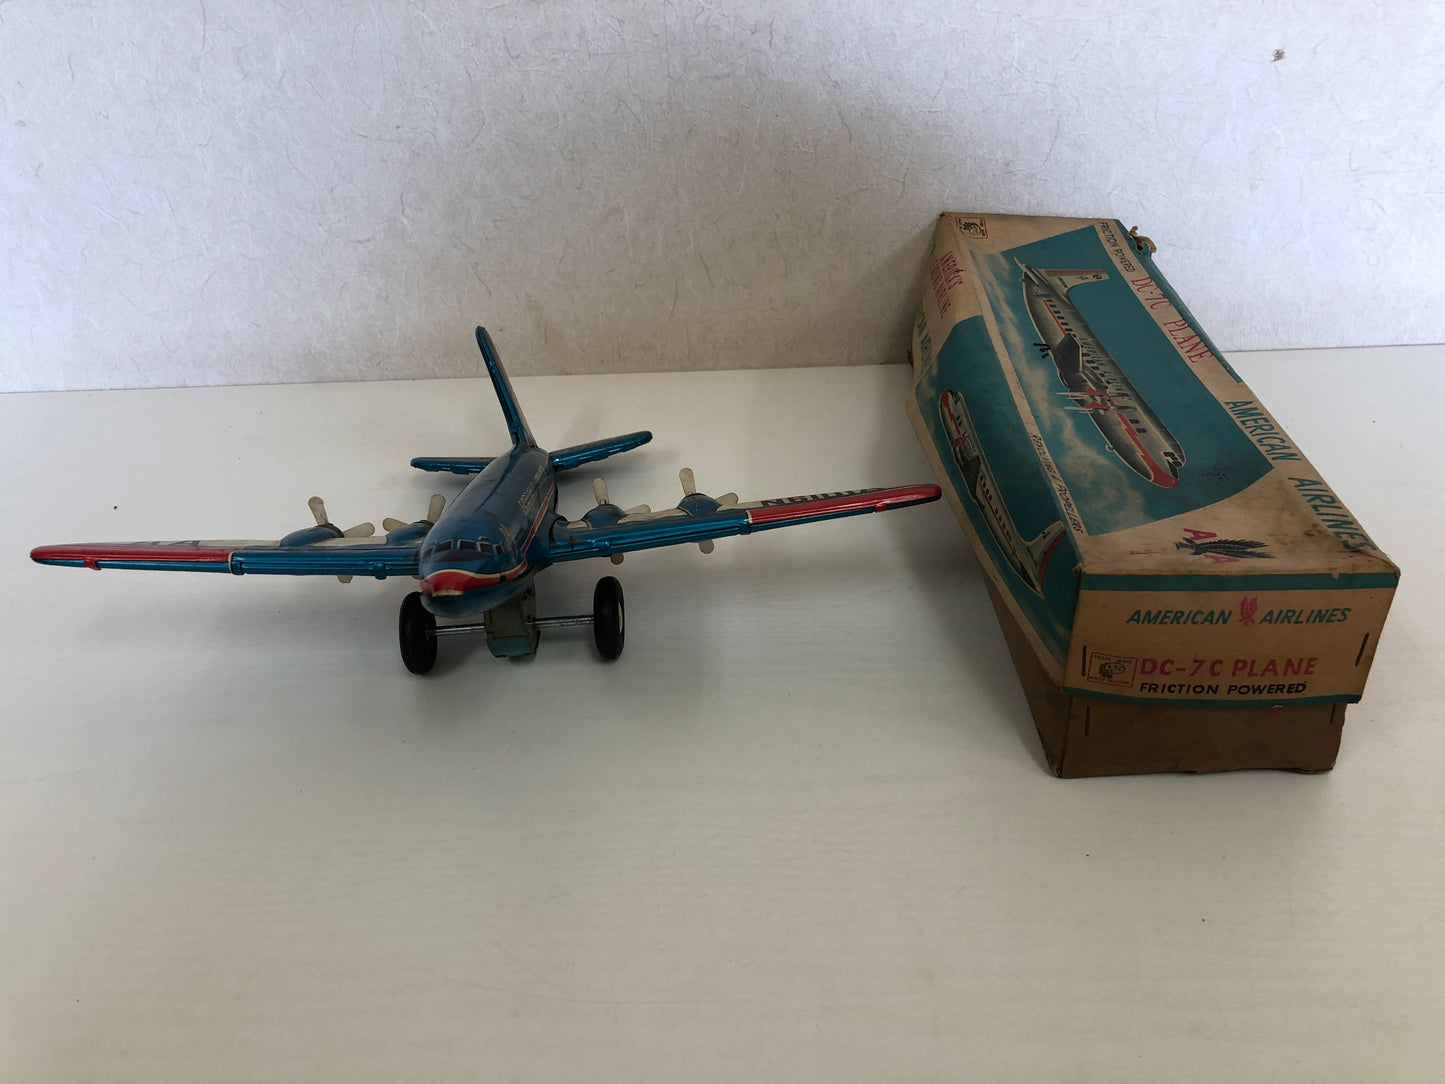 Y4136 TIN TOY Airplane DC-7C plane American Airlines box Japan antique vintage